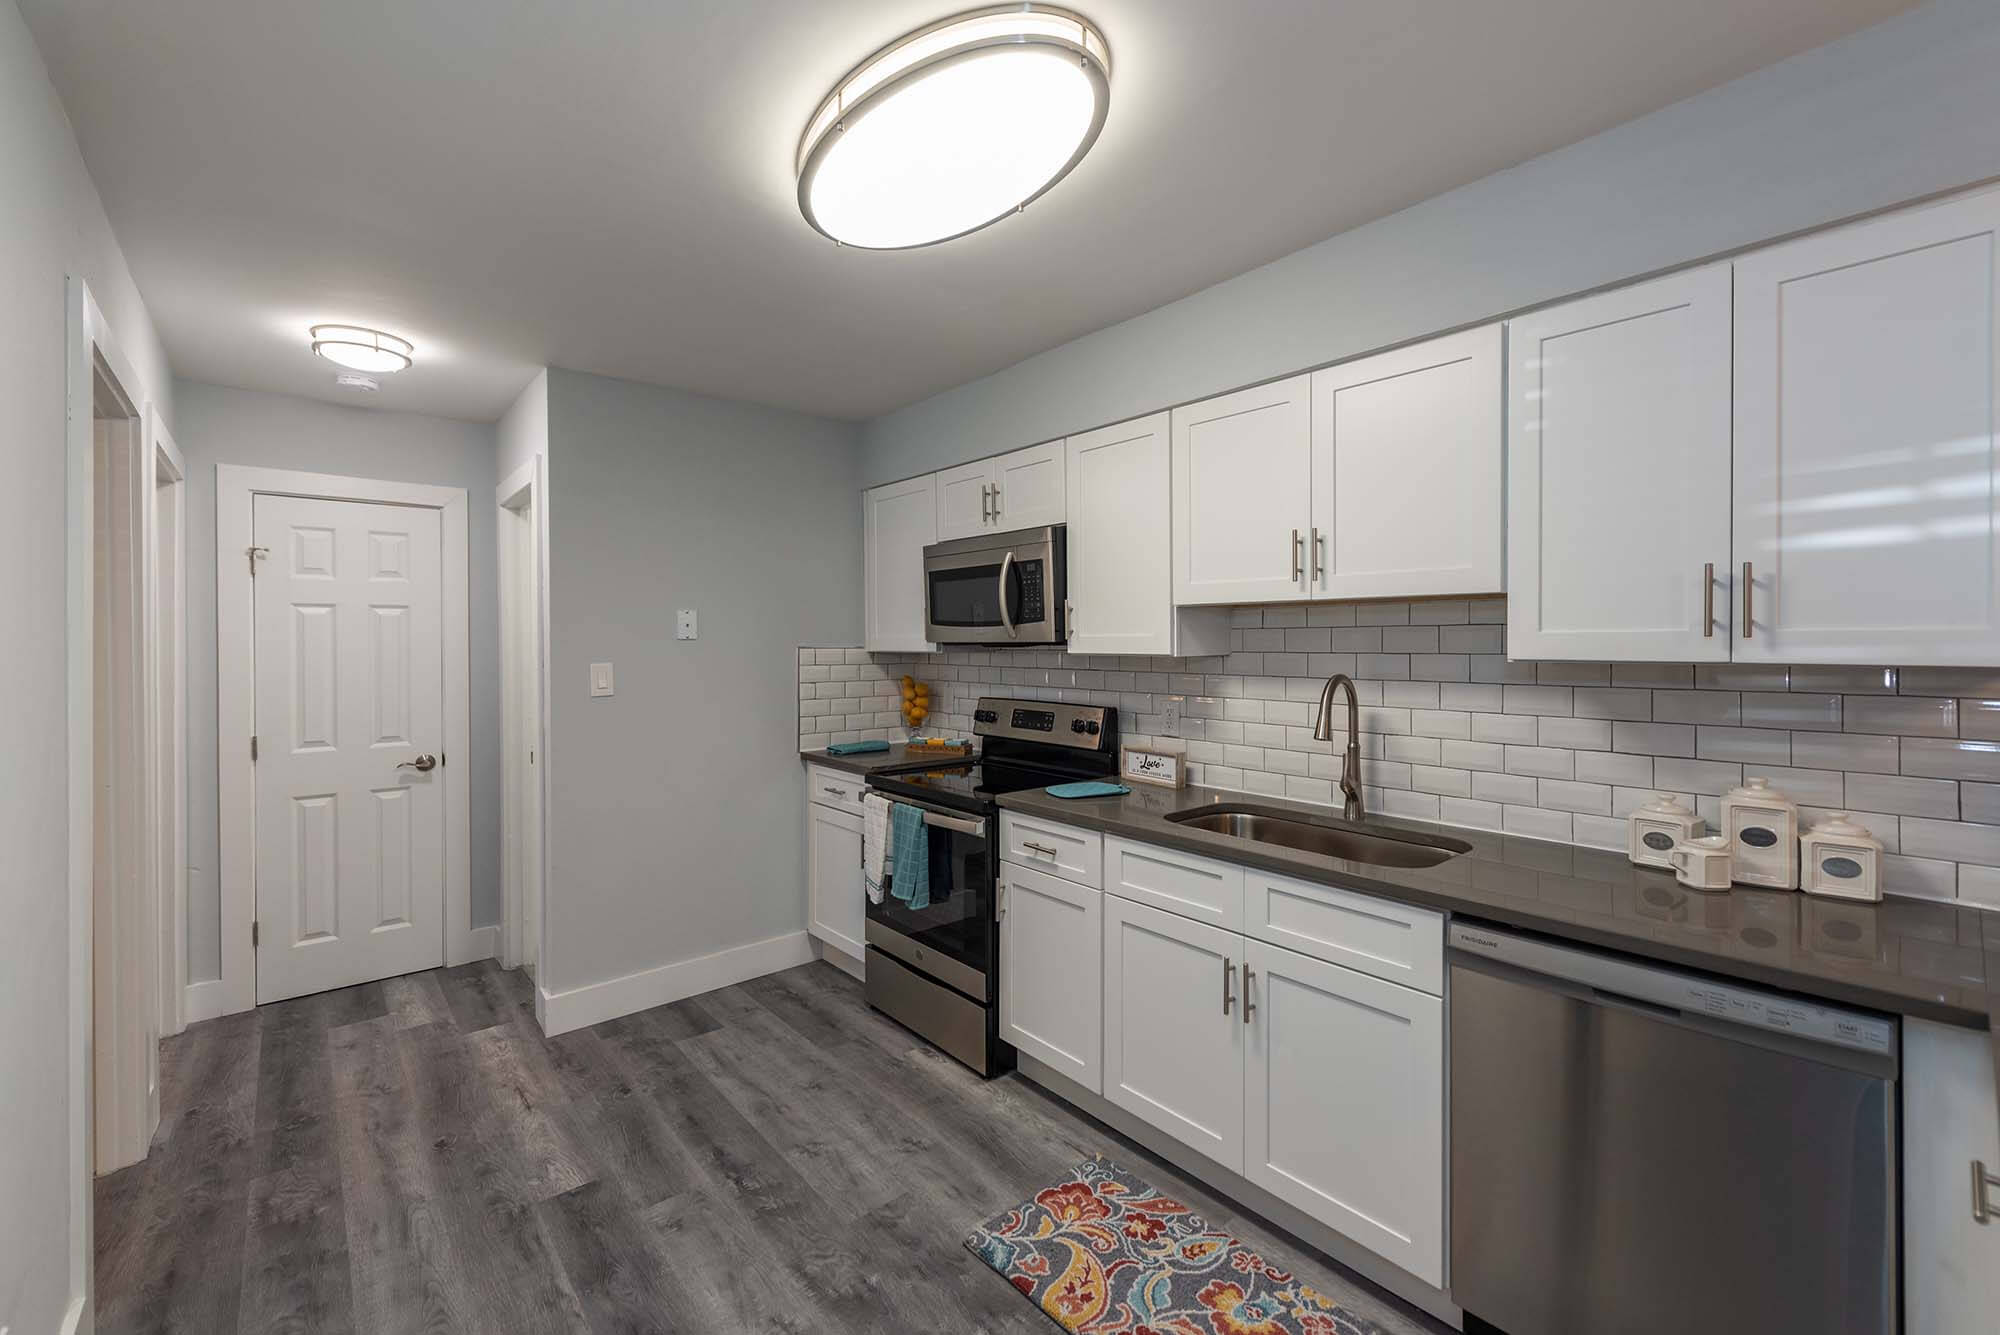 Model kitchen with white cabinet at Reserves at Tidewater, Norfolk, Virginia